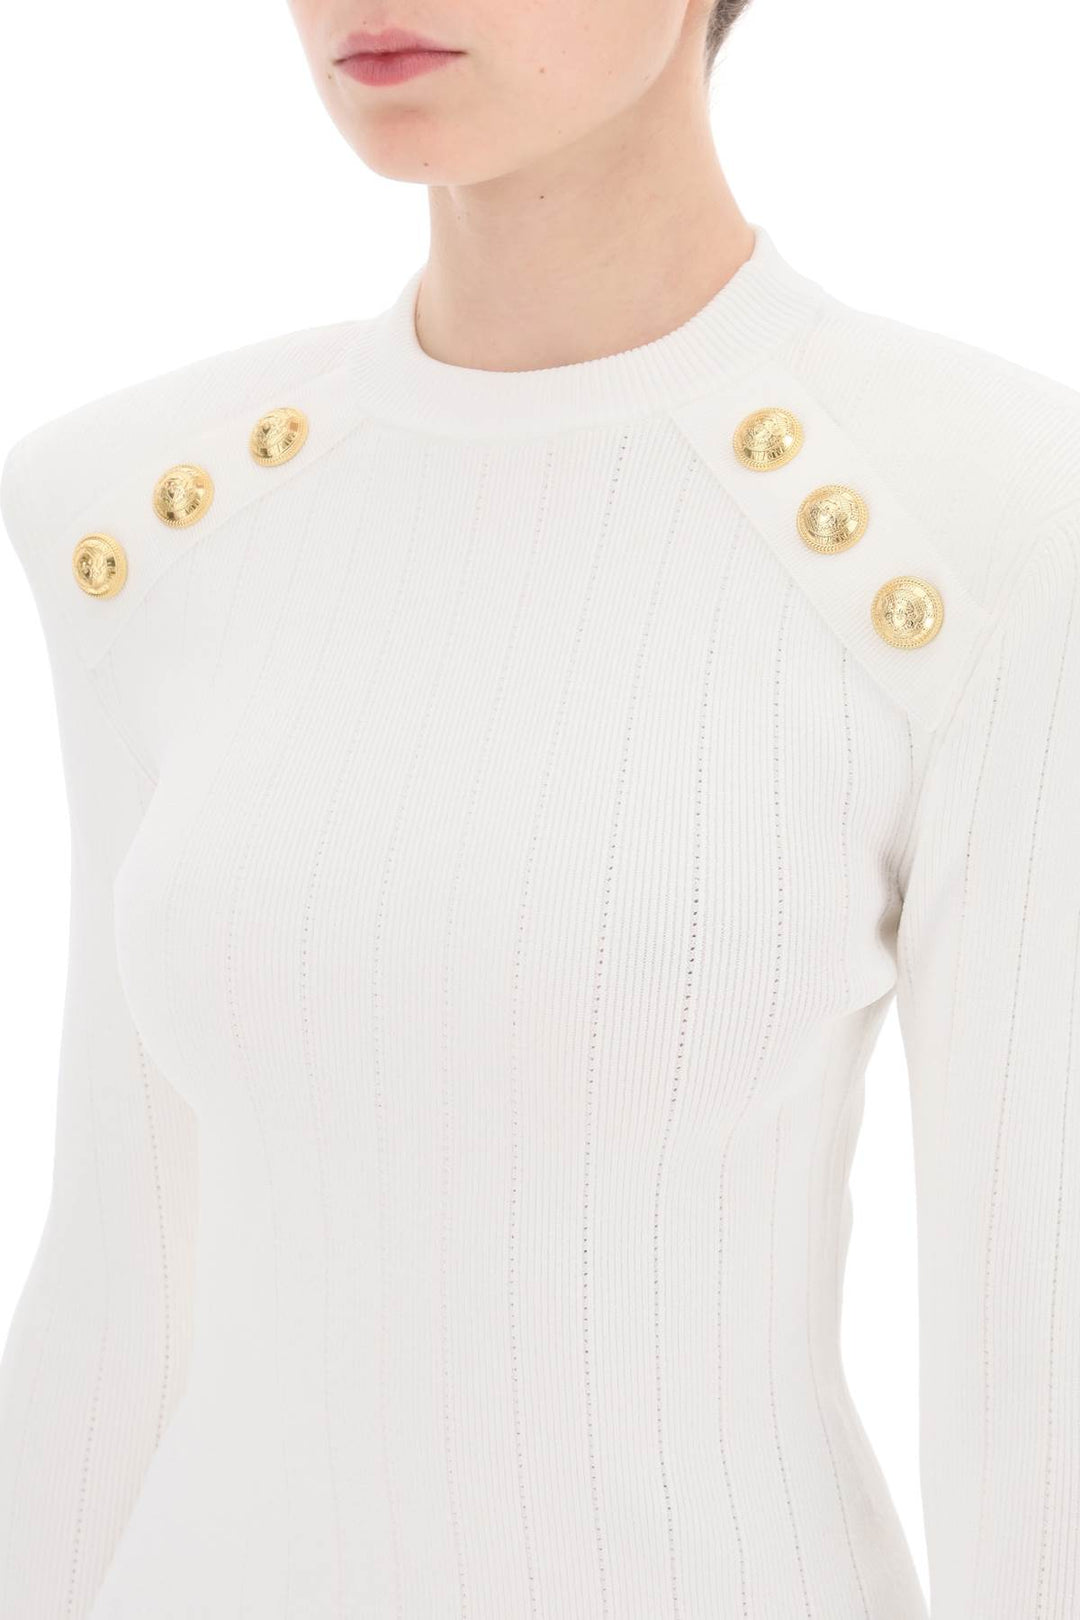 Balmain Crew Neck Sweater With Buttons   White